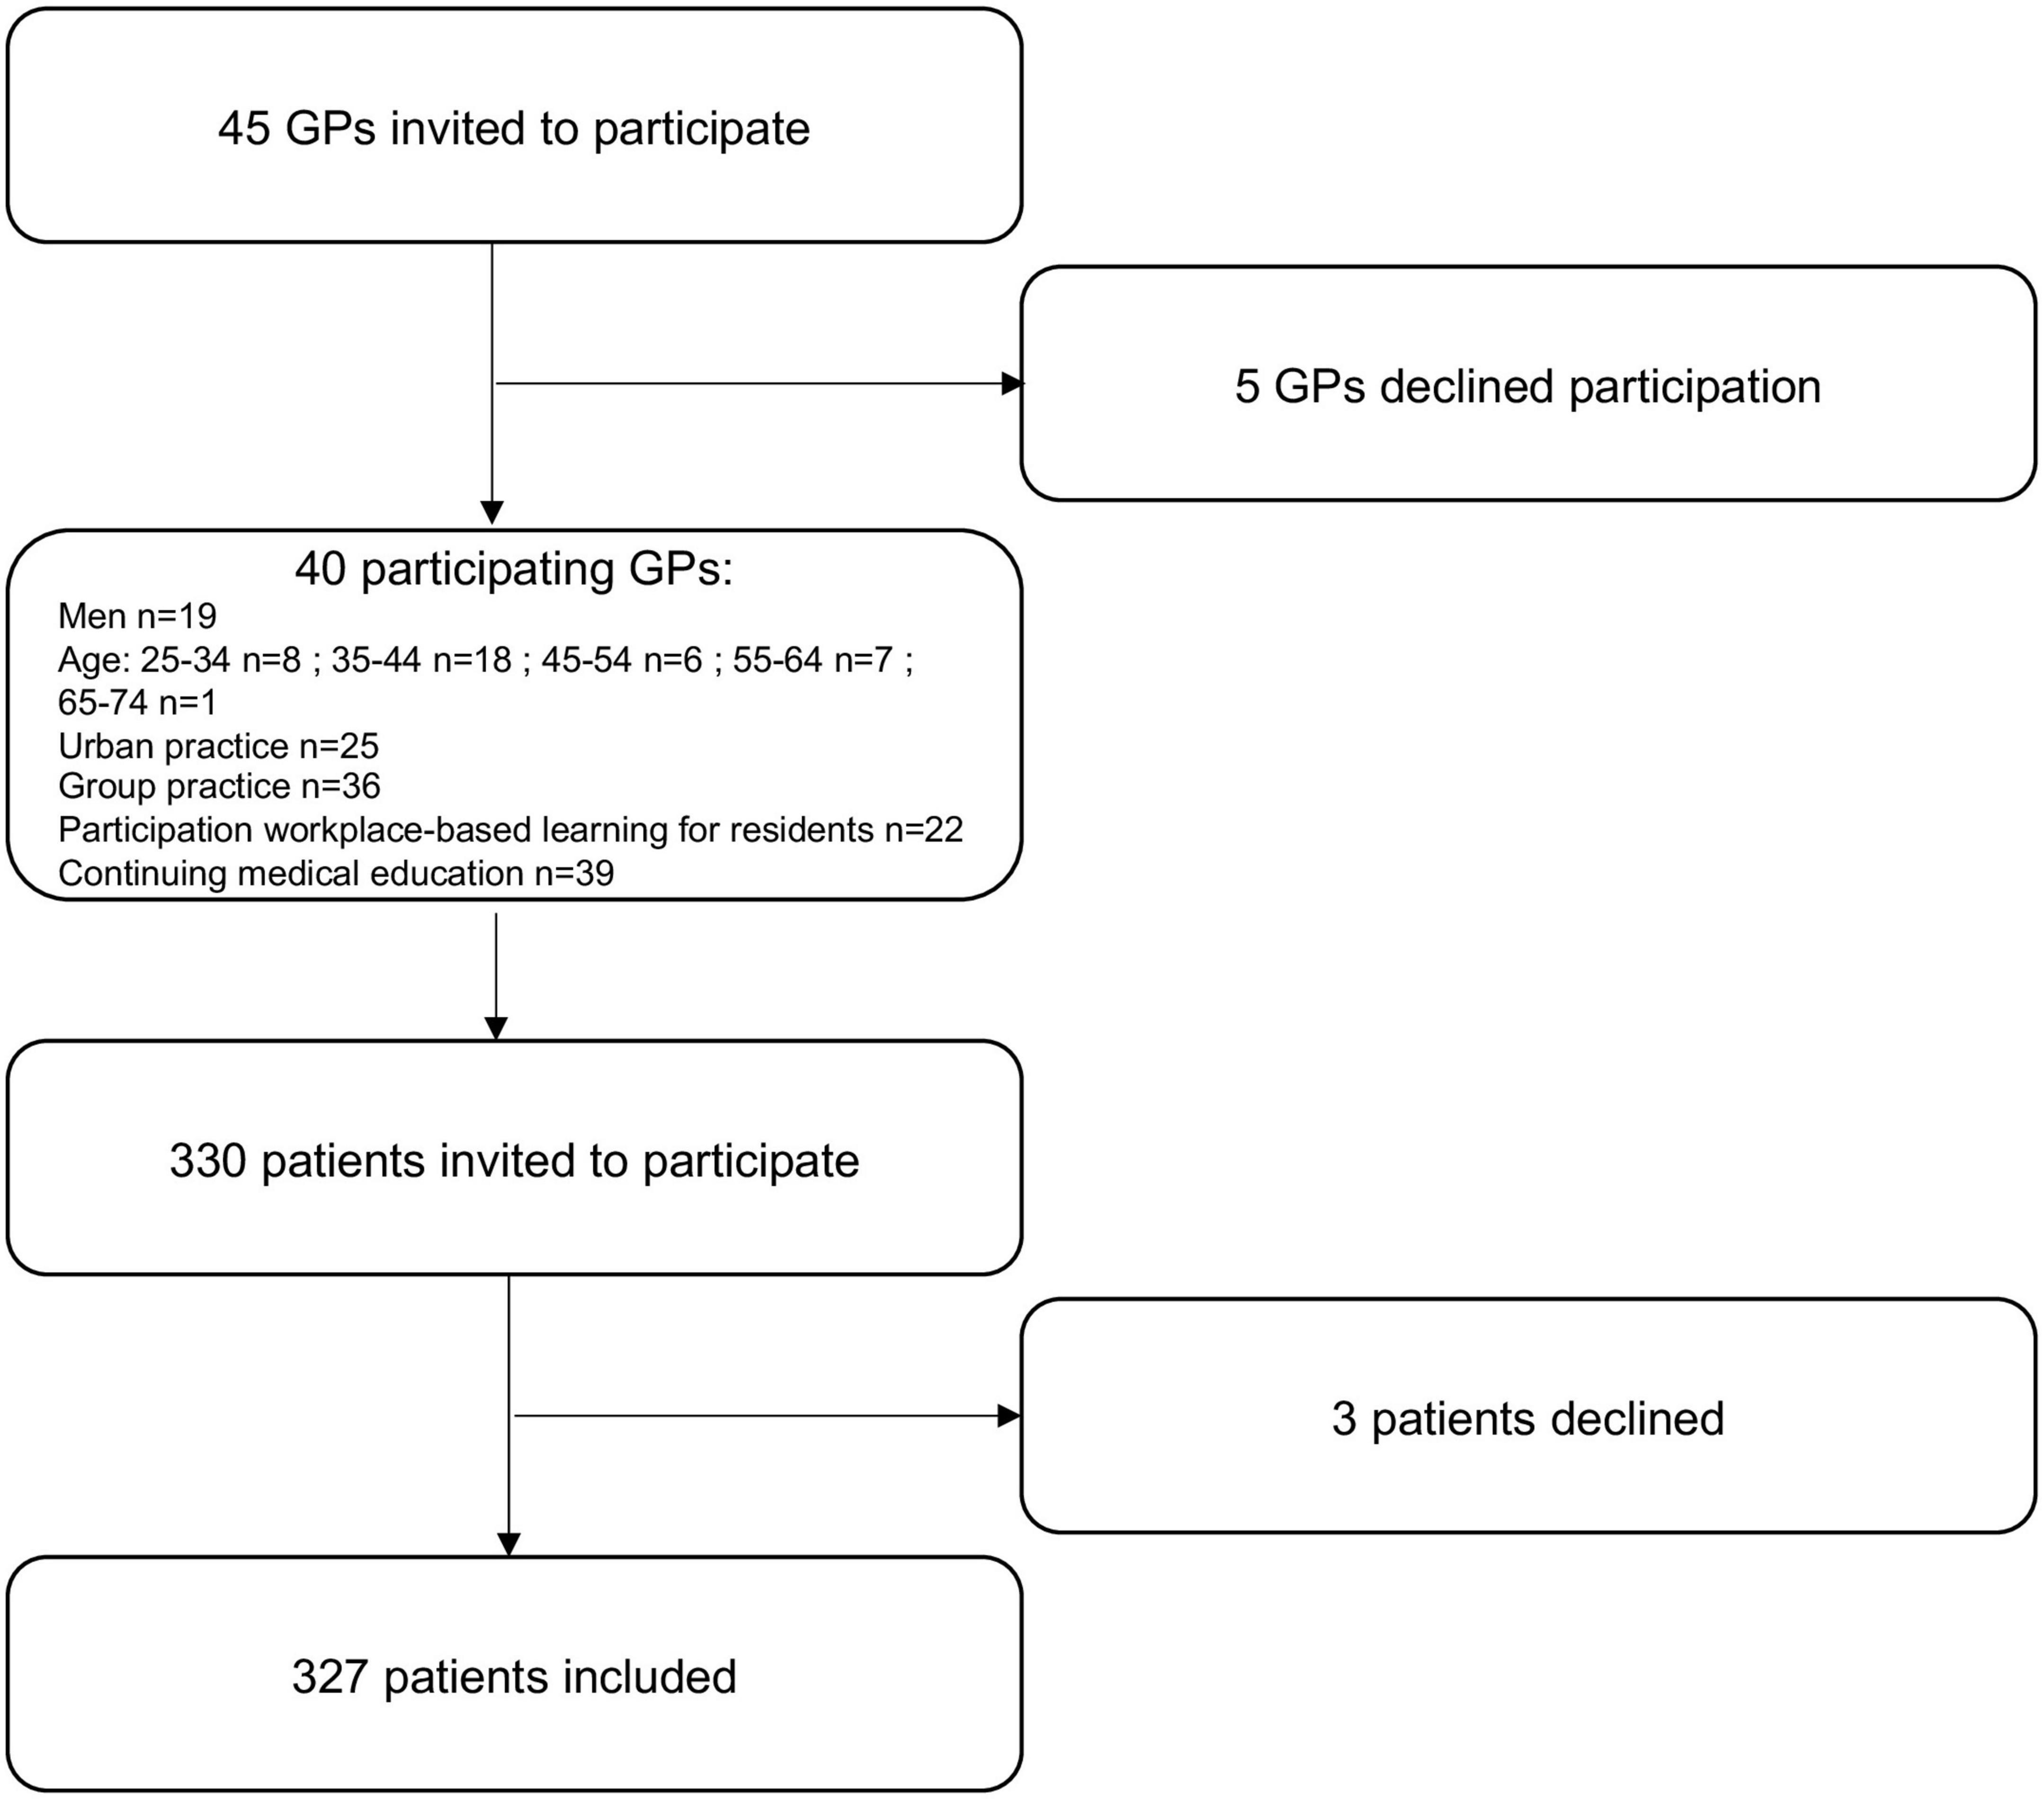 Multimorbidity and statin prescription for primary prevention of cardiovascular diseases: A cross-sectional study in general practice in France